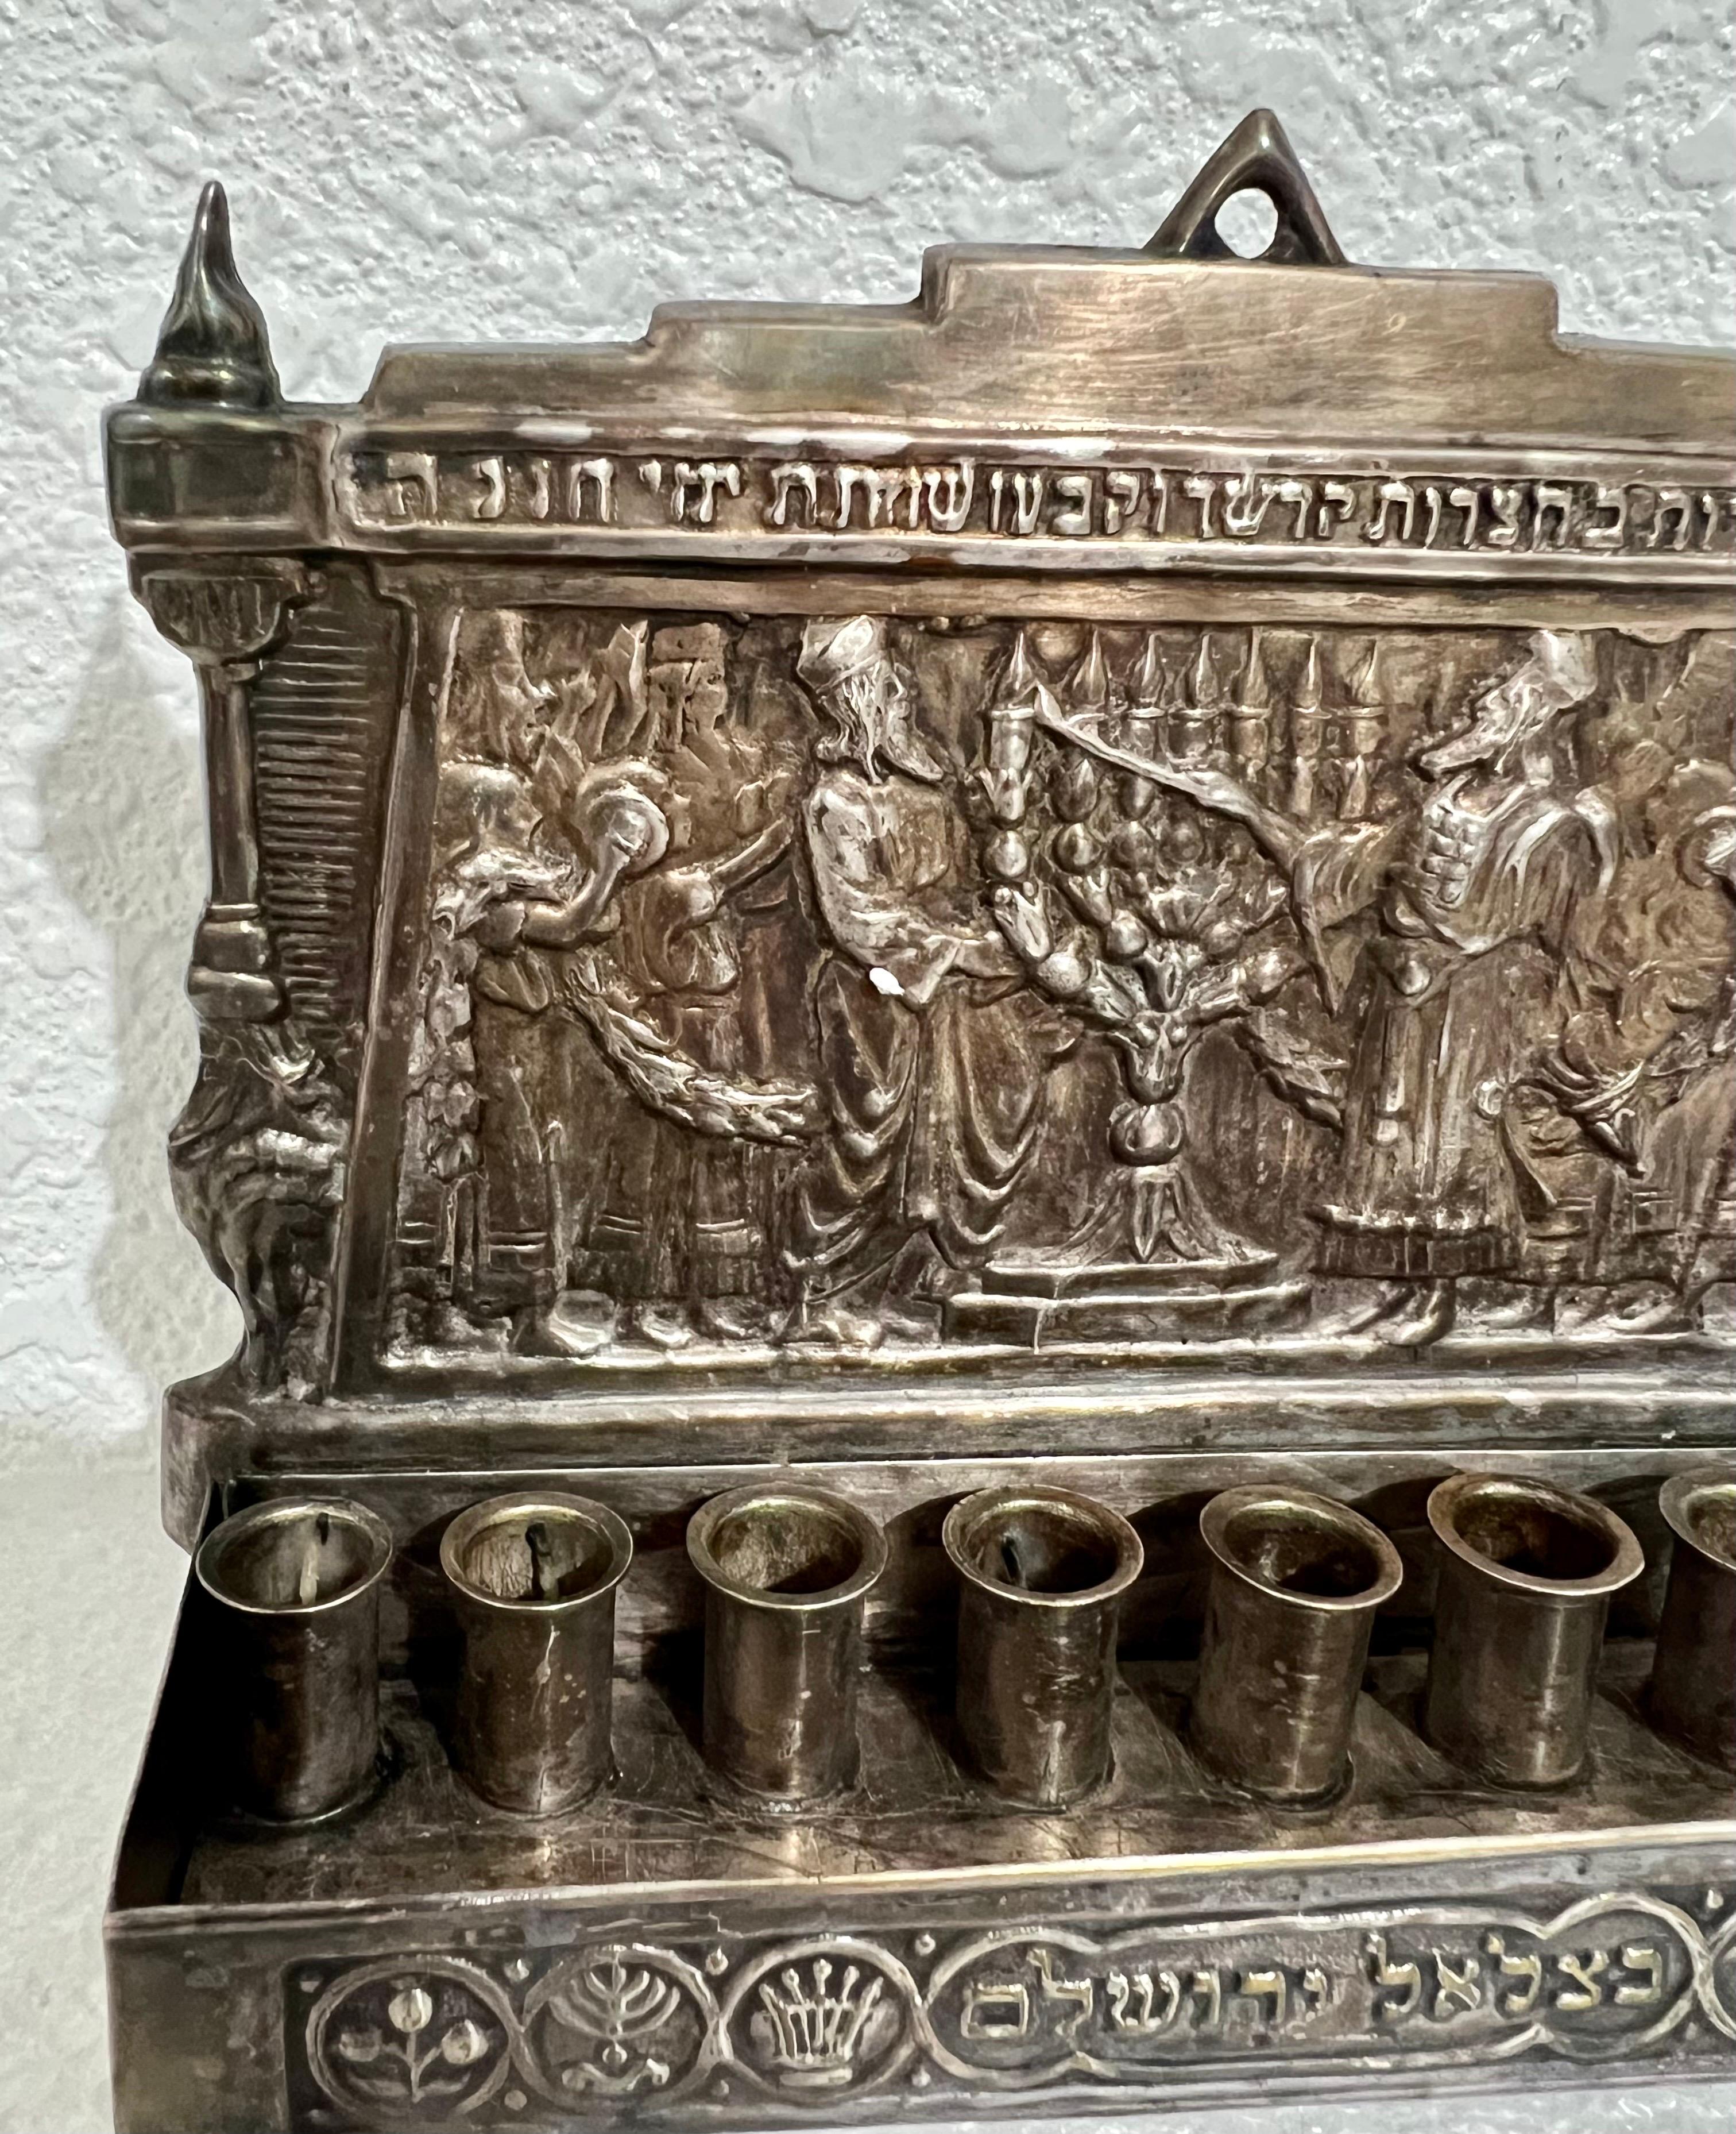 Rare Early 20th C Bezalel Silverplate Repousse Judaica Menorah Made in Palestine For Sale 1